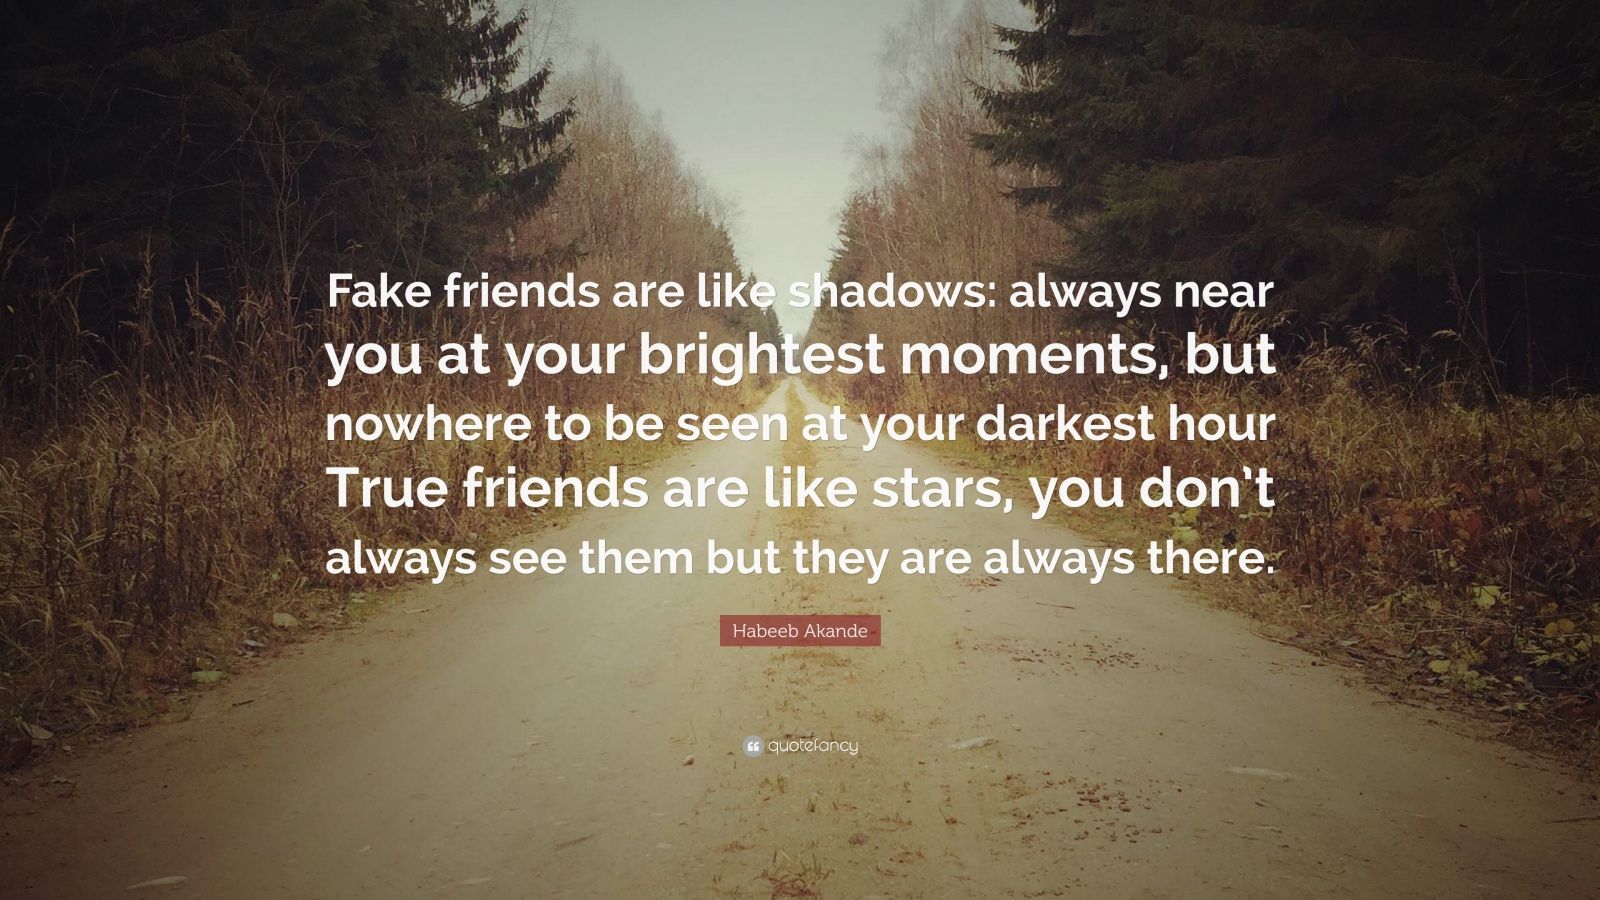 Habeeb Akande Quote: “Fake friends are like shadows: always near you at ...